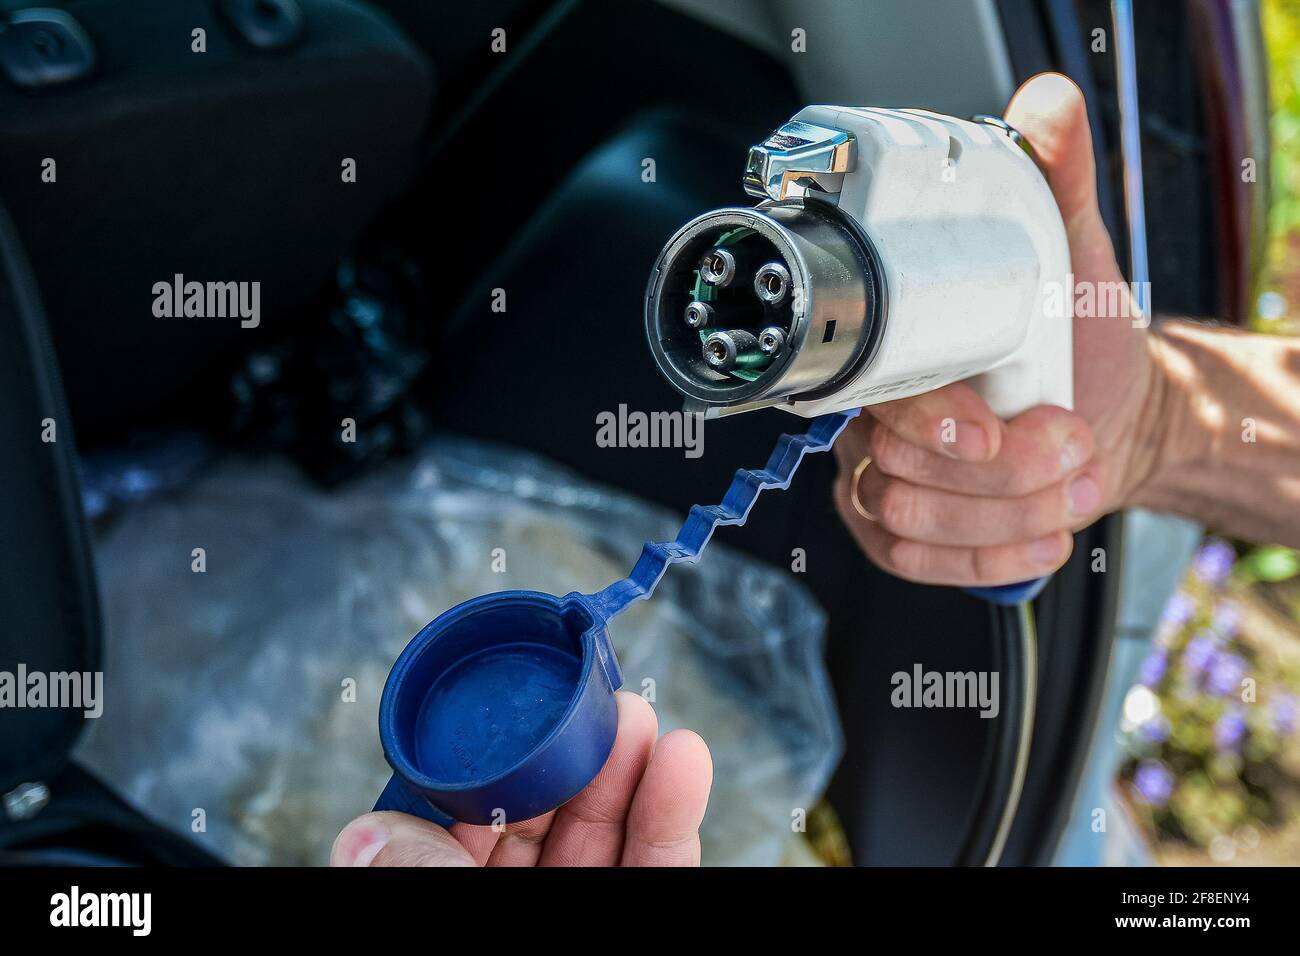 Charging device for an electric car in the man's hand against the background of an open trunk.  Stock Photo